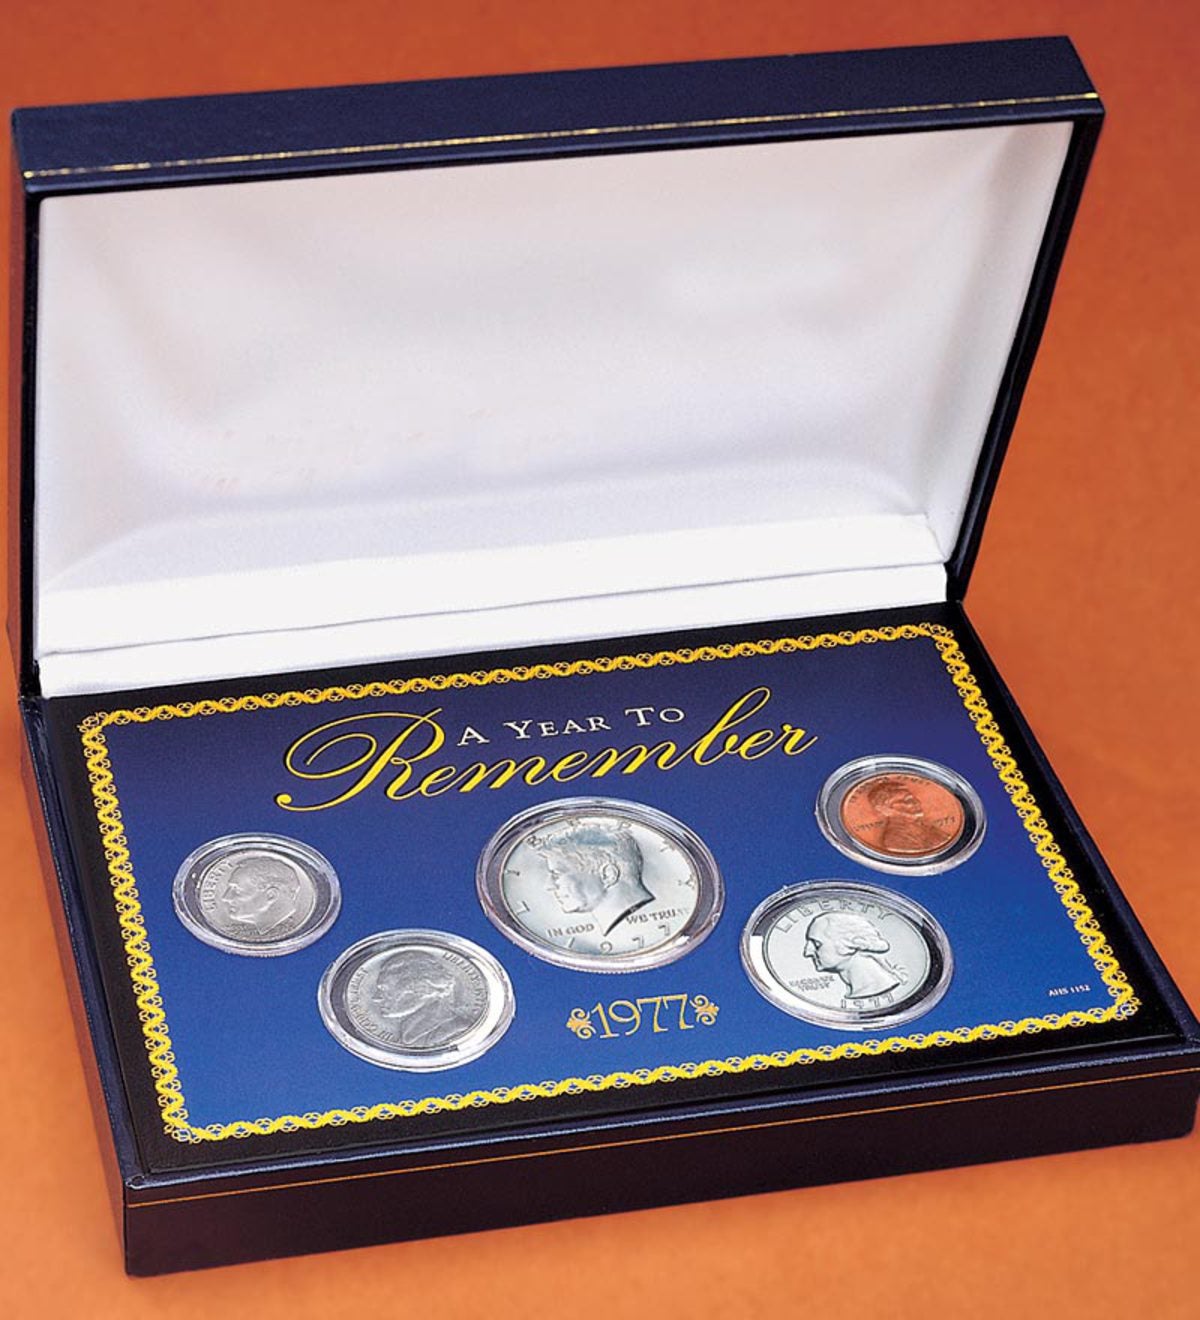 NEW American Coin Treasures Year To Remember Coin Box Set 2010